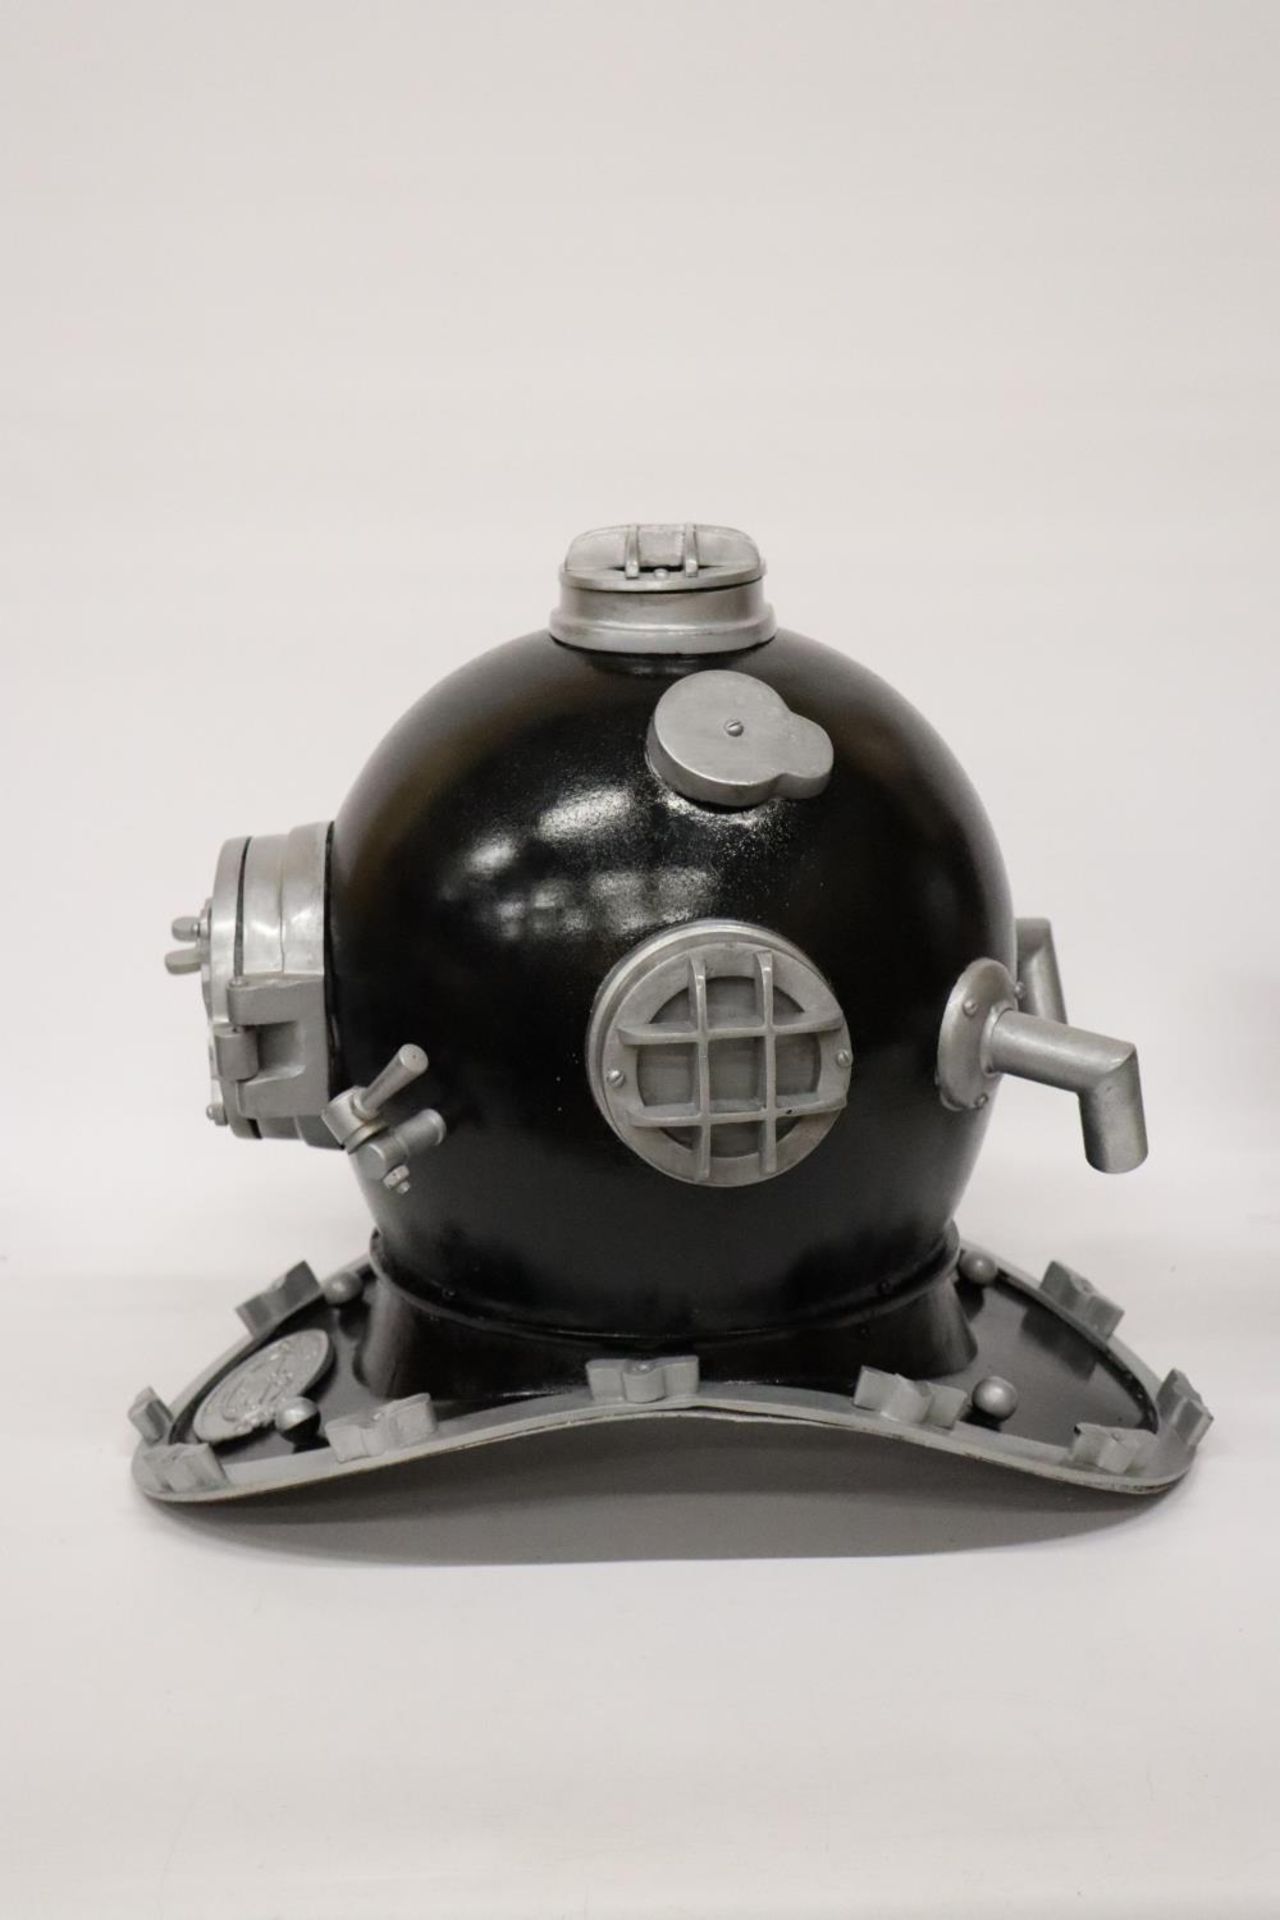 A LARGE CAST REPLICA DIVERS HELMET, HEIGHT APPROX 40CM - Image 3 of 6